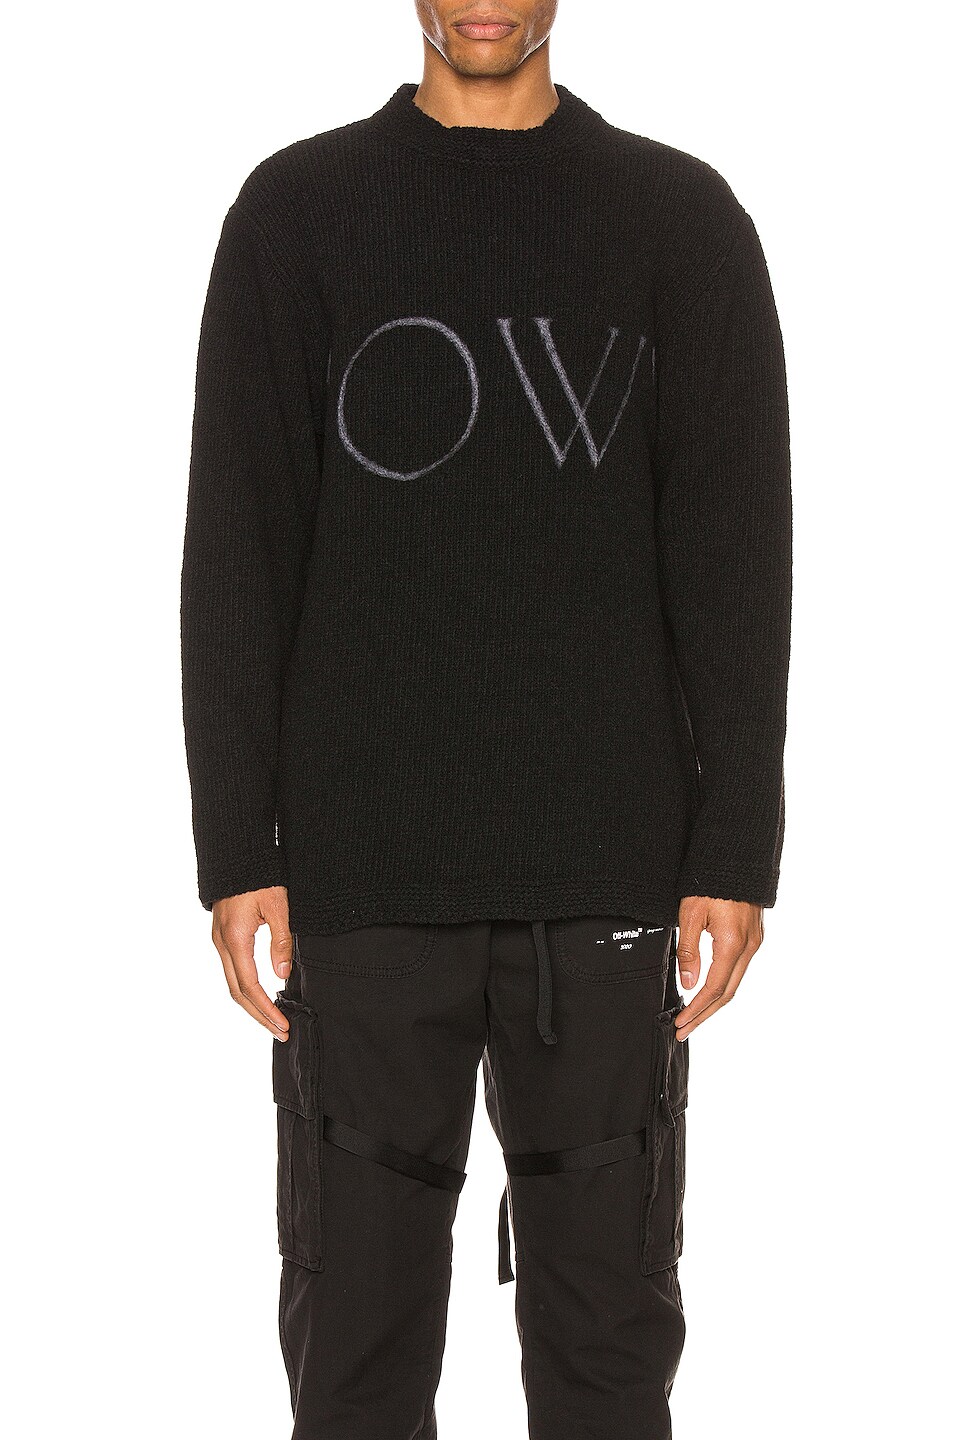 Image 1 of OFF-WHITE OW Knit Oversize Sweater in Black & White